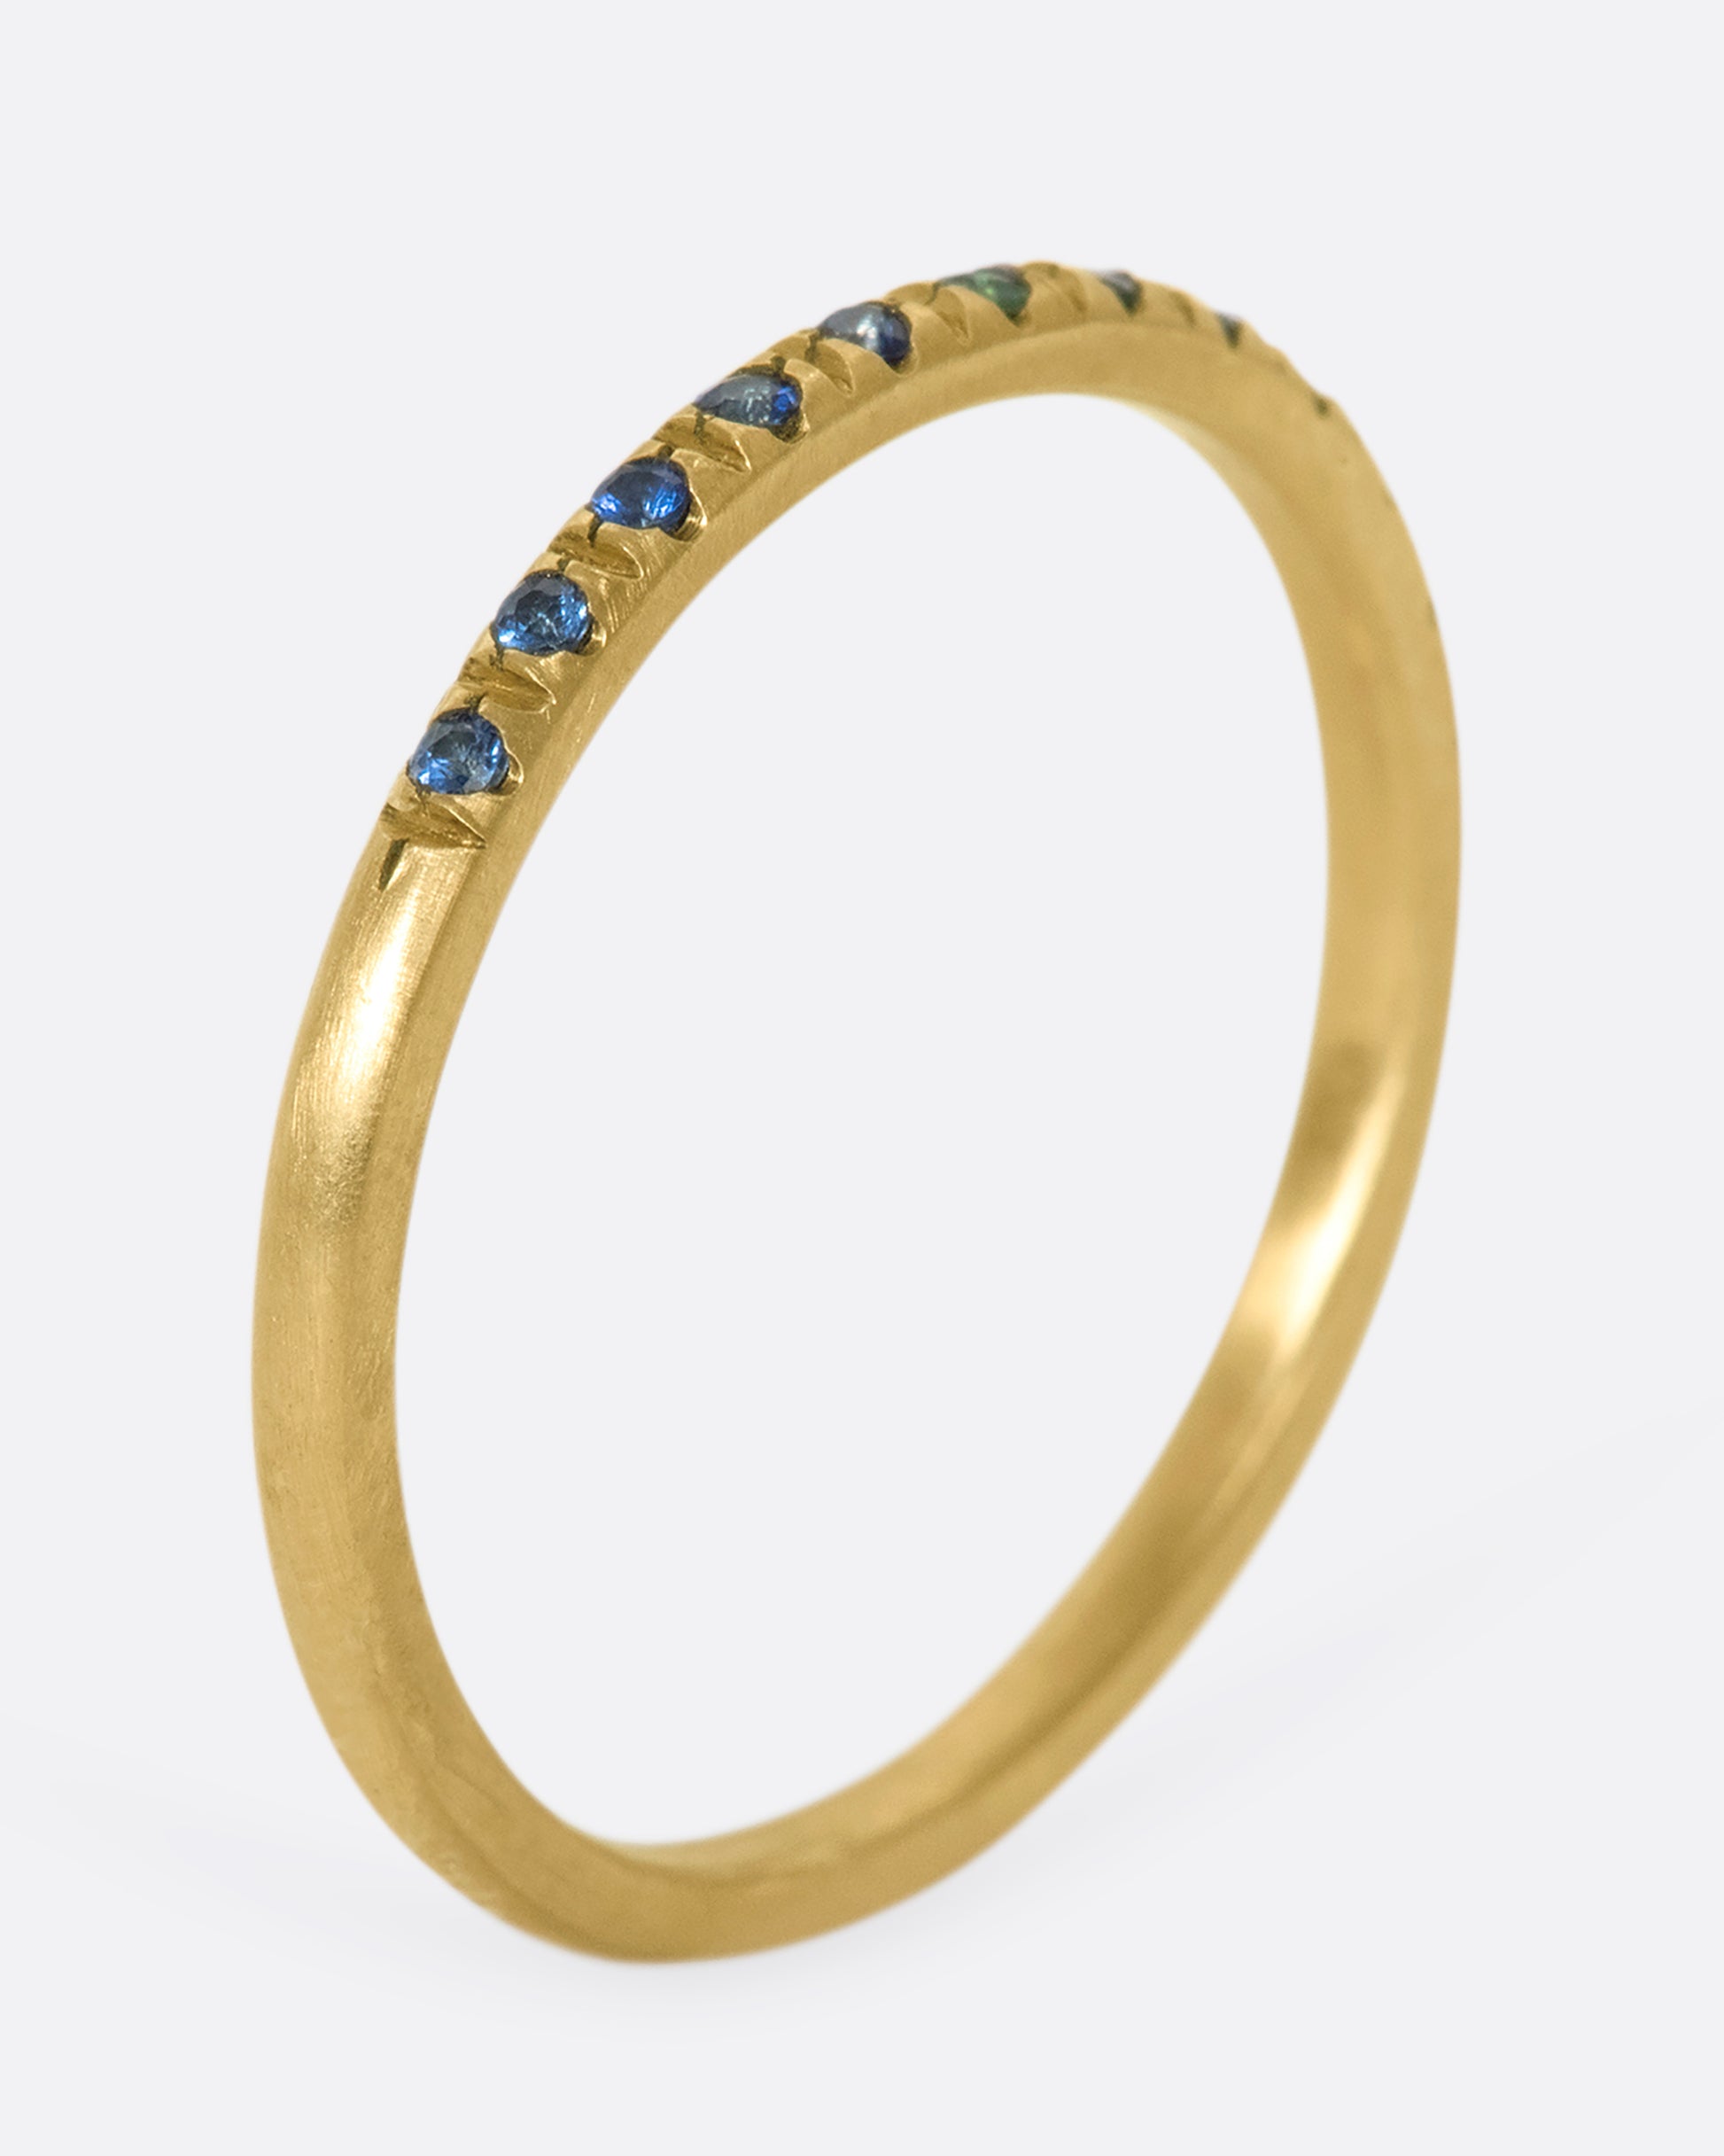 a thin yellow gold band with three green garnets in the middle and blue sapphires on either side